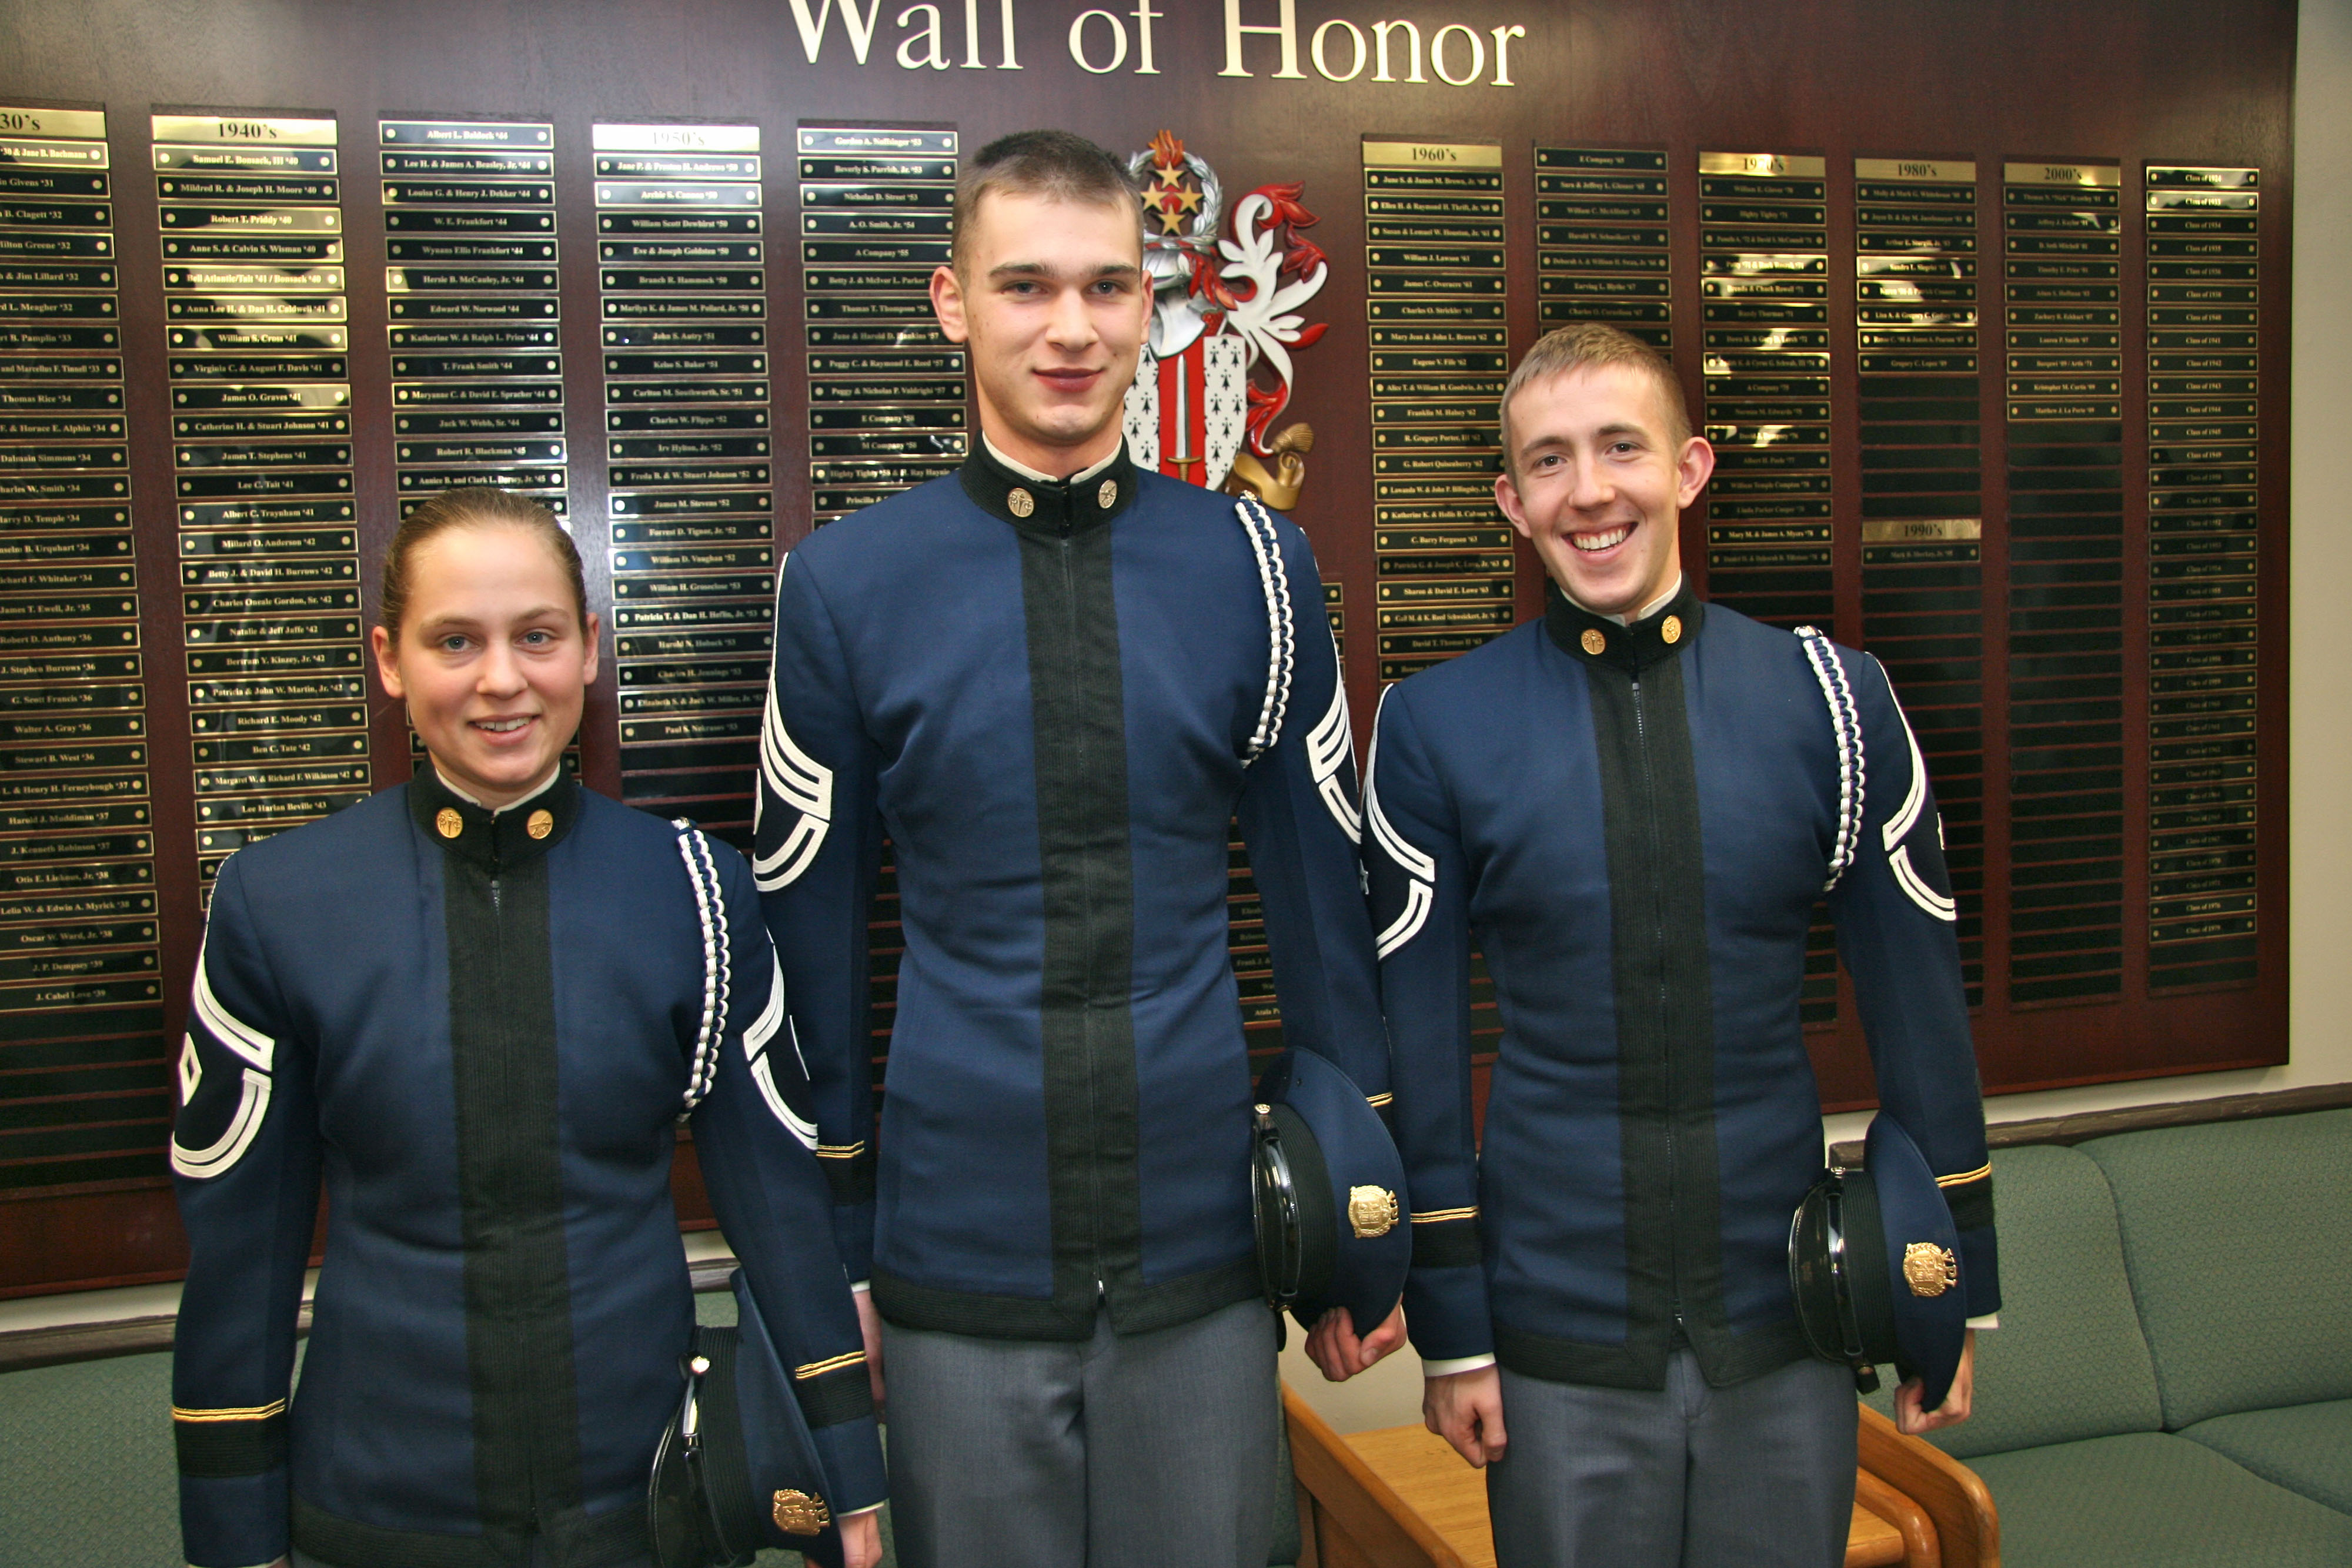 From left to right are Cadets Faith Mueller, Justin Hunts, and Charles Goodman